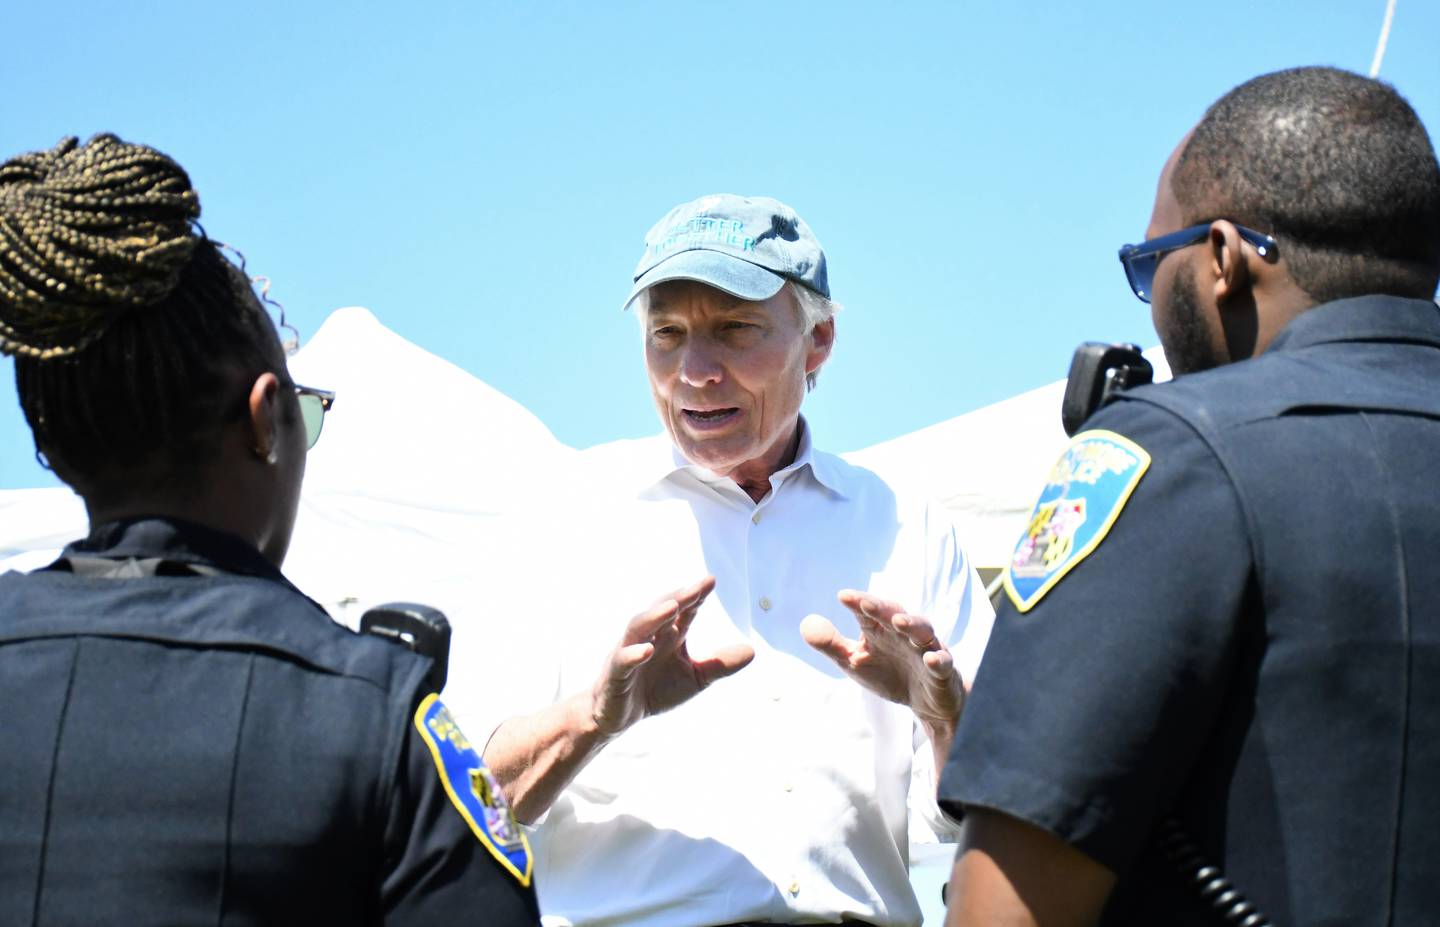 Peter Franchot, the state comptroller who is running for governor as a Democrat, talks with Baltimore City police officers during the AFRAM festival at Druid Hill Park on Sunday, June 19, 2022. Franchot gave them commemorative medallions from his office, as he often does when he meets people with backgrounds in law enforcement or military service.